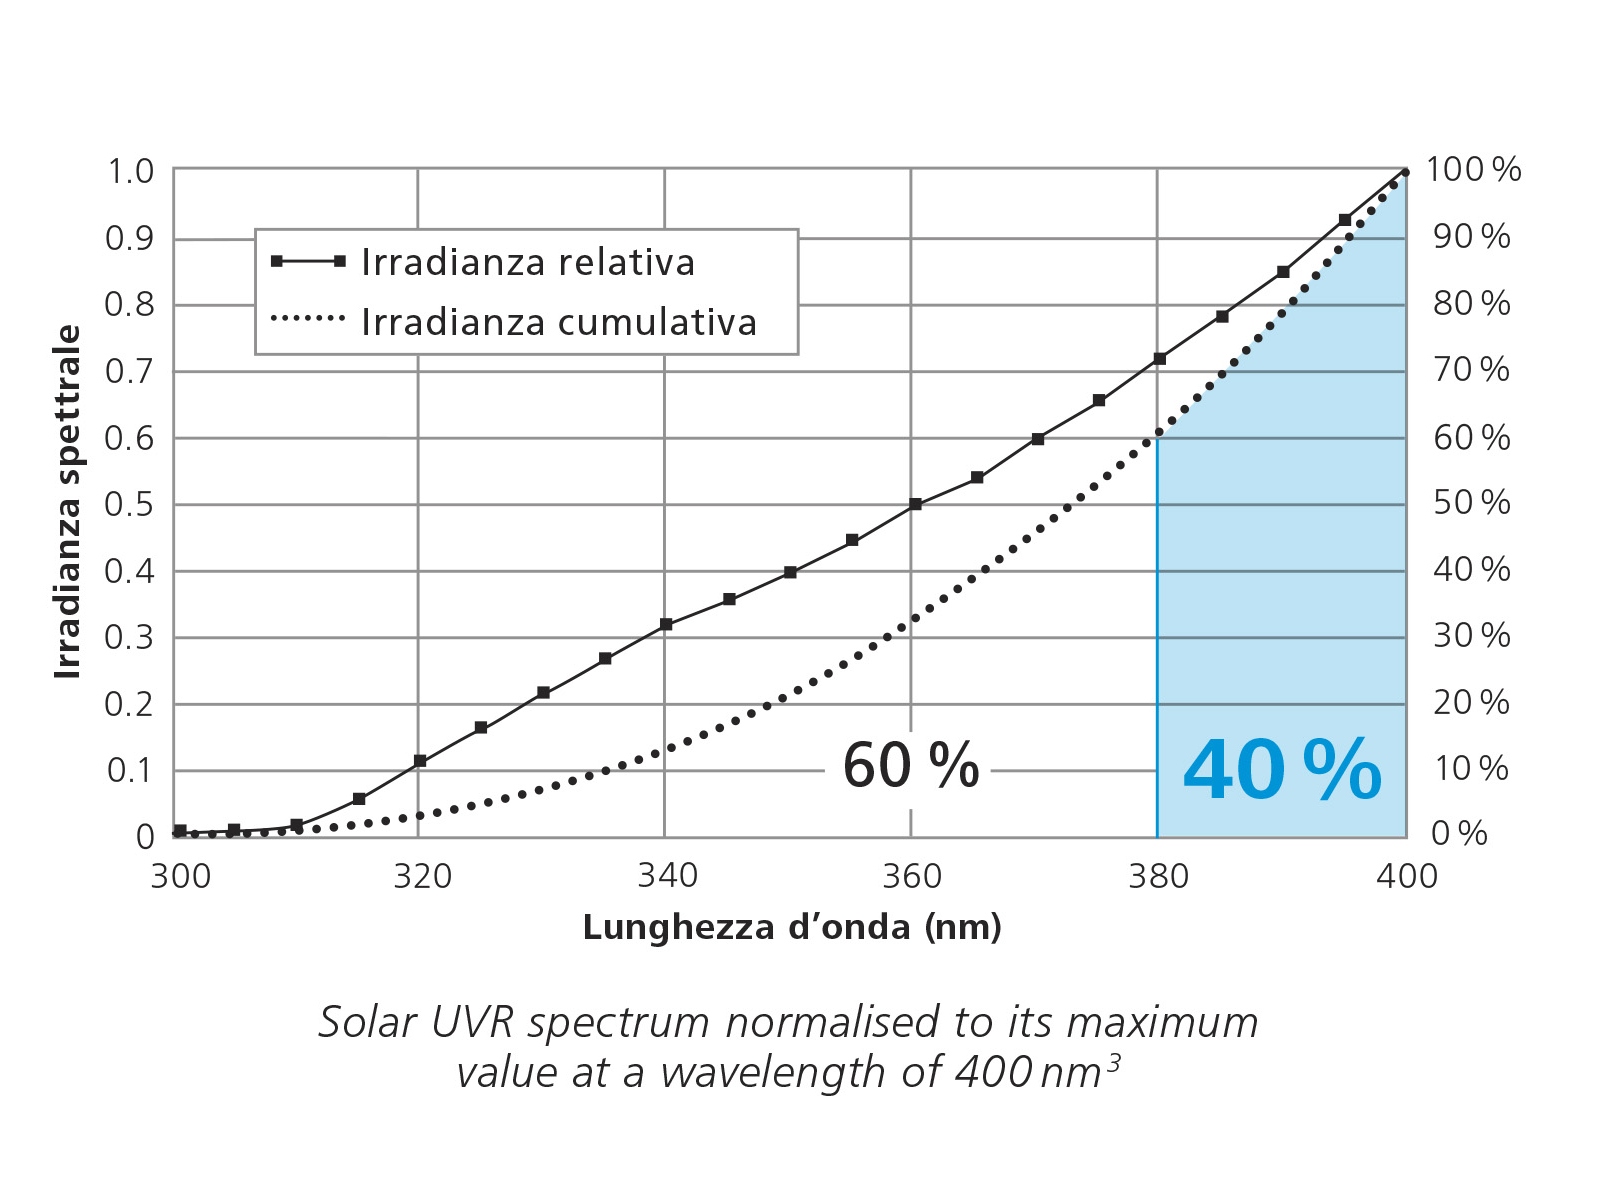 The image shows a line chart, illustrating the total and relative irradiance below each wavelength. 